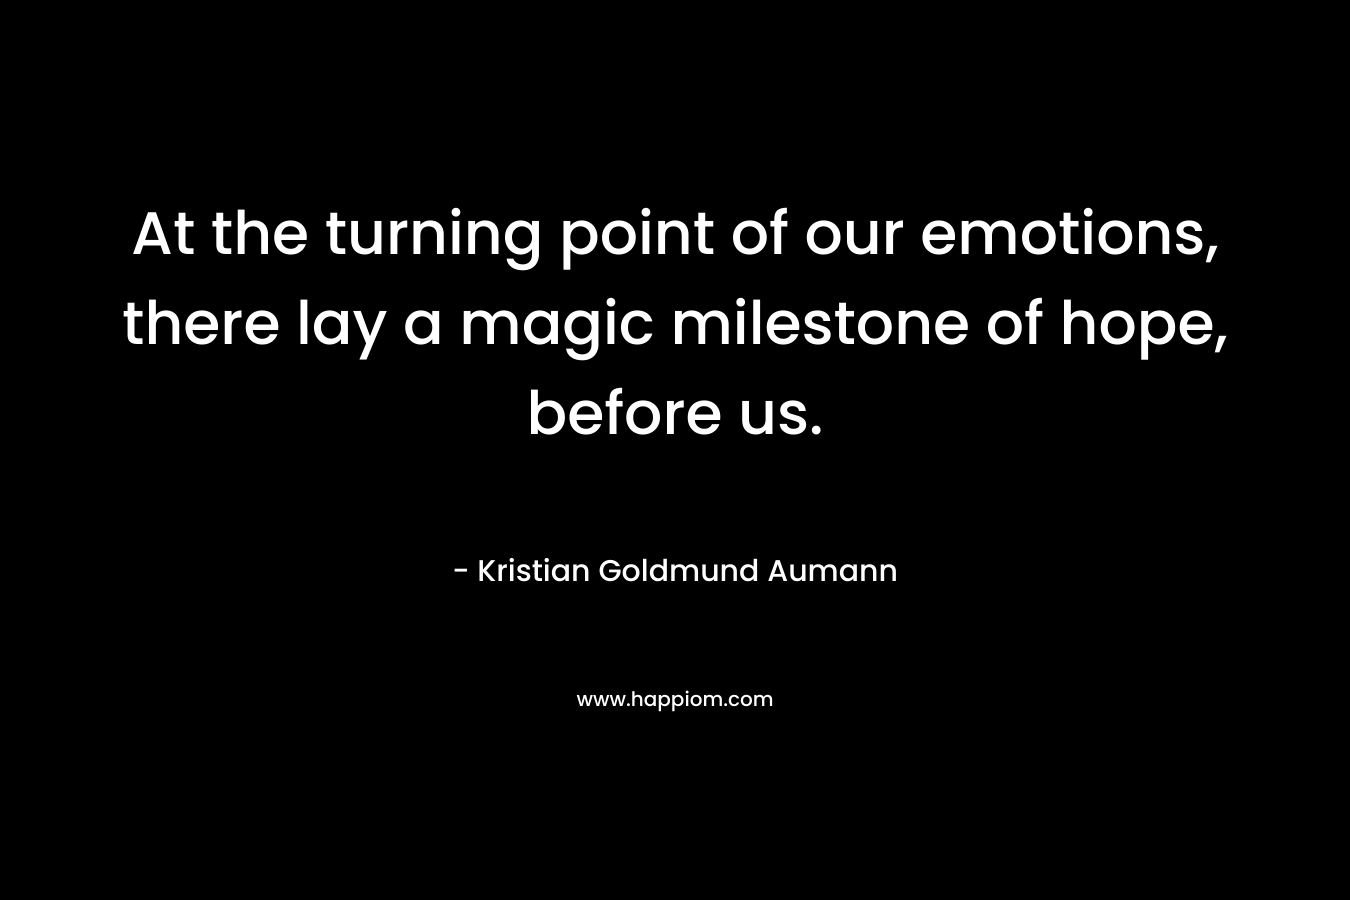 At the turning point of our emotions, there lay a magic milestone of hope, before us.